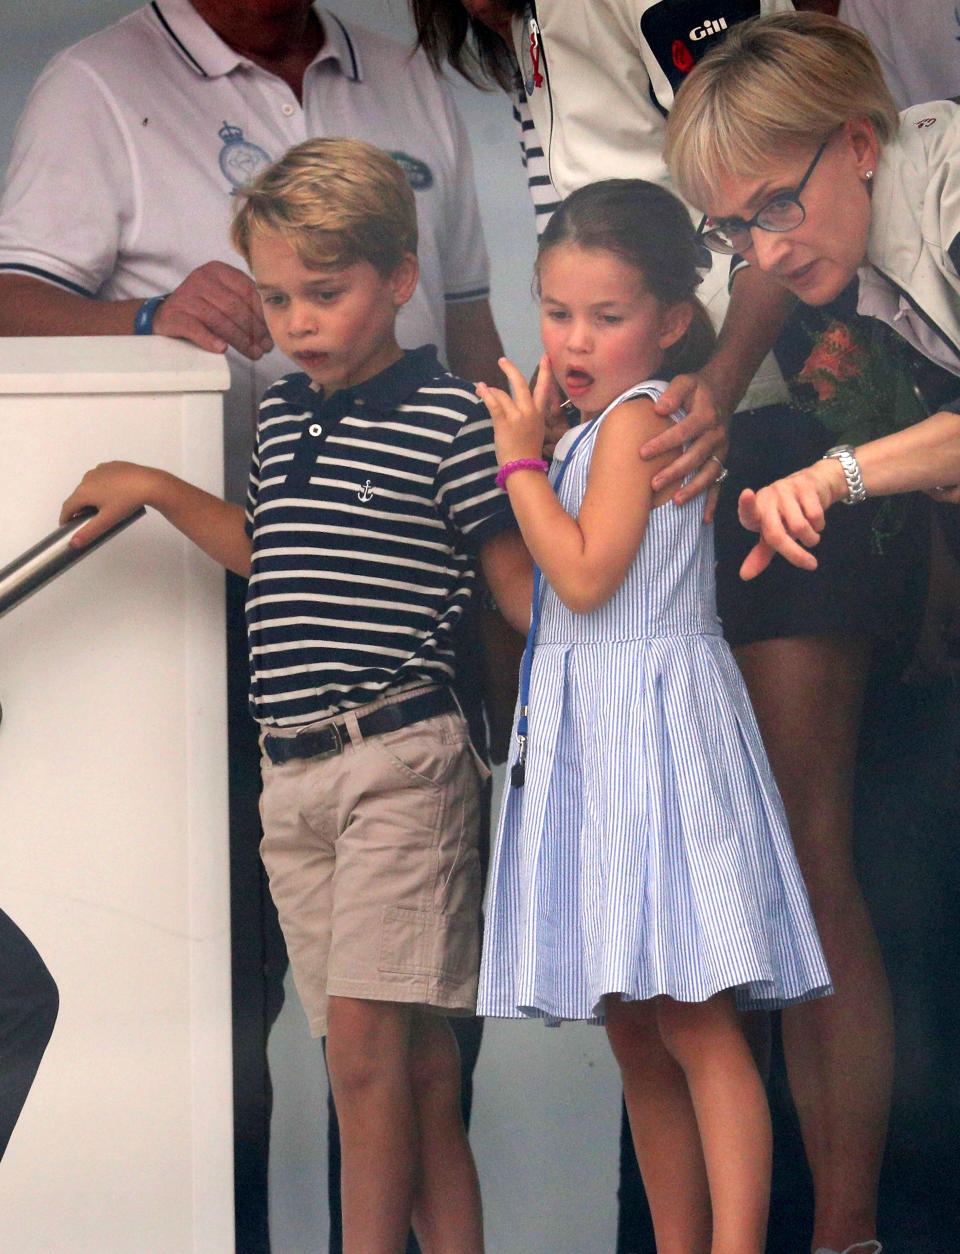 COWES, ENGLAND - AUGUST 08: Prince George of Cambridge and Princess Charlotte of Cambridge look through a window at the prize giving after the King's Cup regatta on August 8, 2019 in Cowes, England. (Photo by Andrew Matthews - WPA Pool/Getty Images)